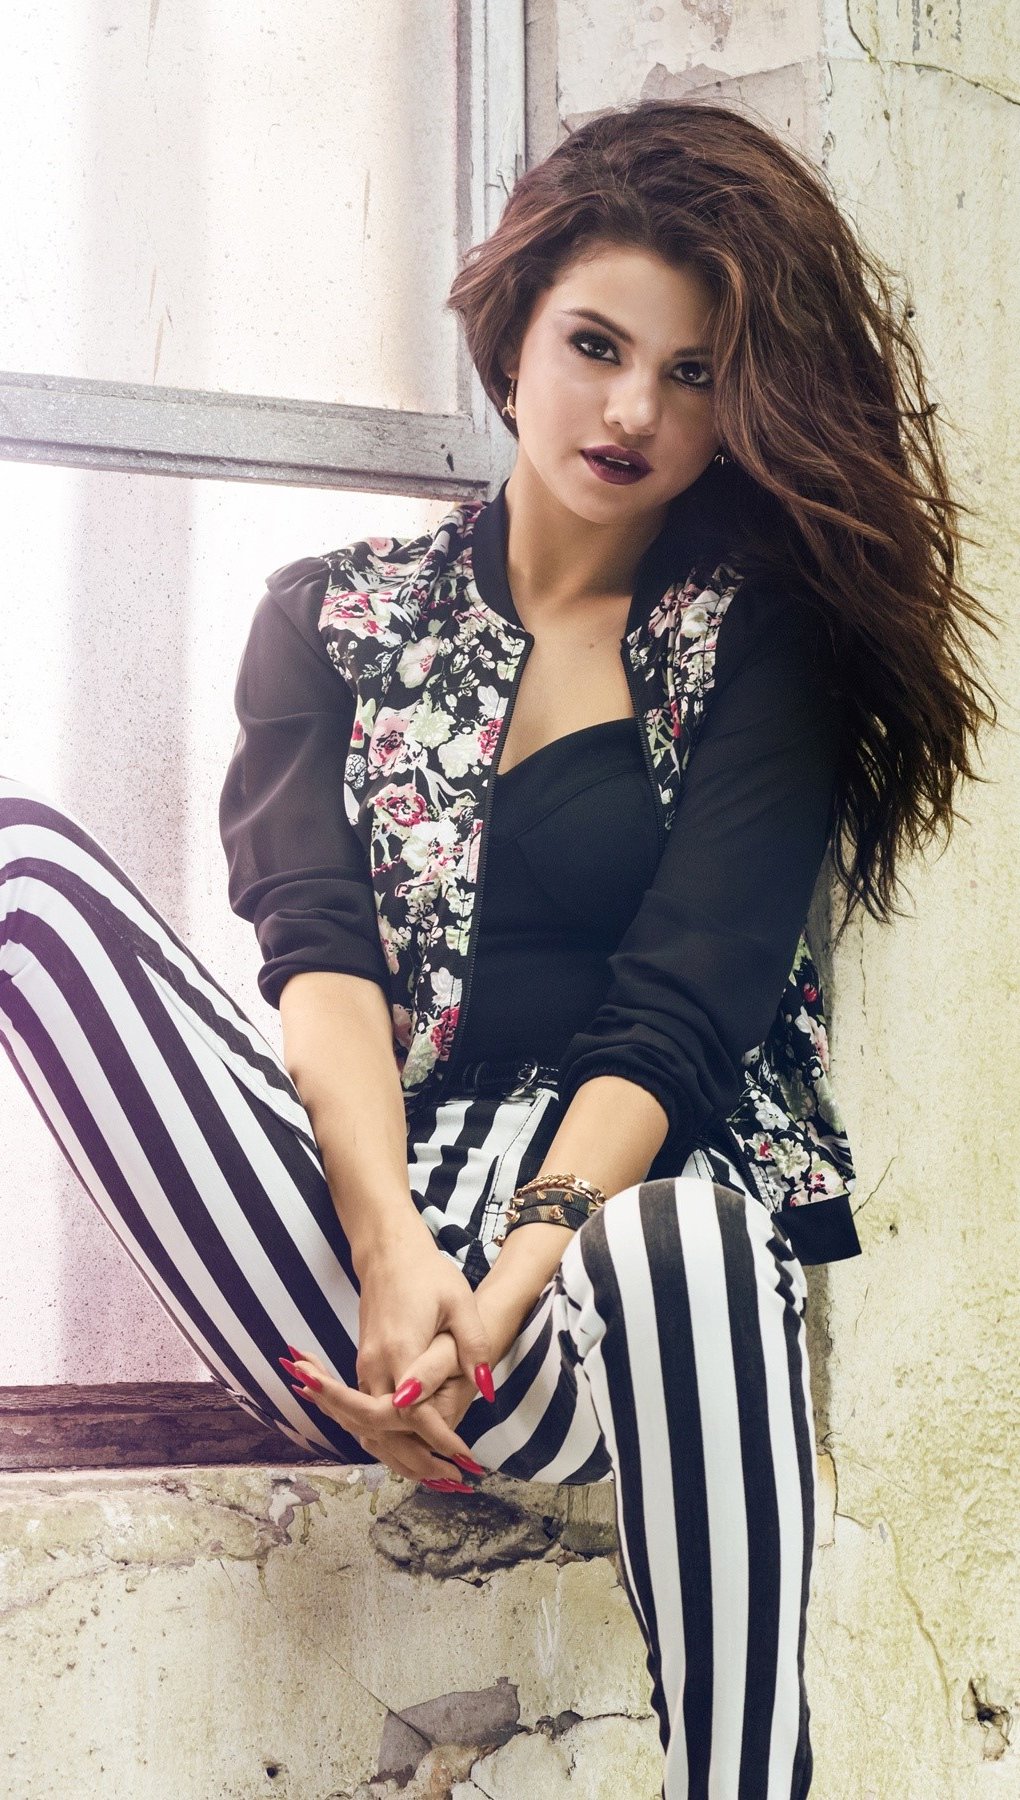 Wallpaper Selena Gomez with striped pants Vertical